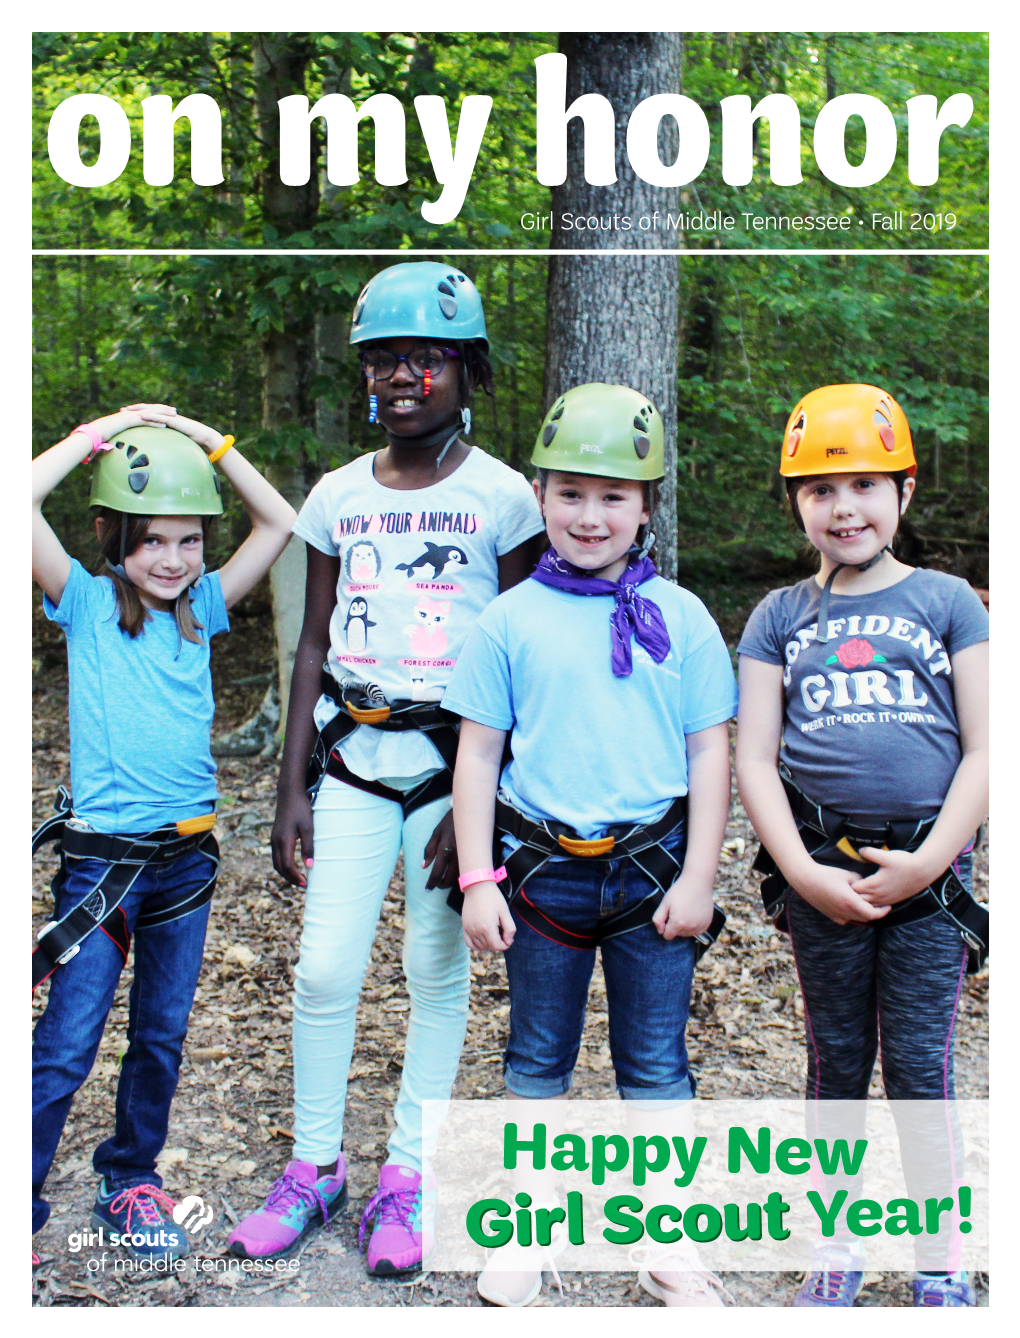 Happy New Girl Scout Girl Scout Year!